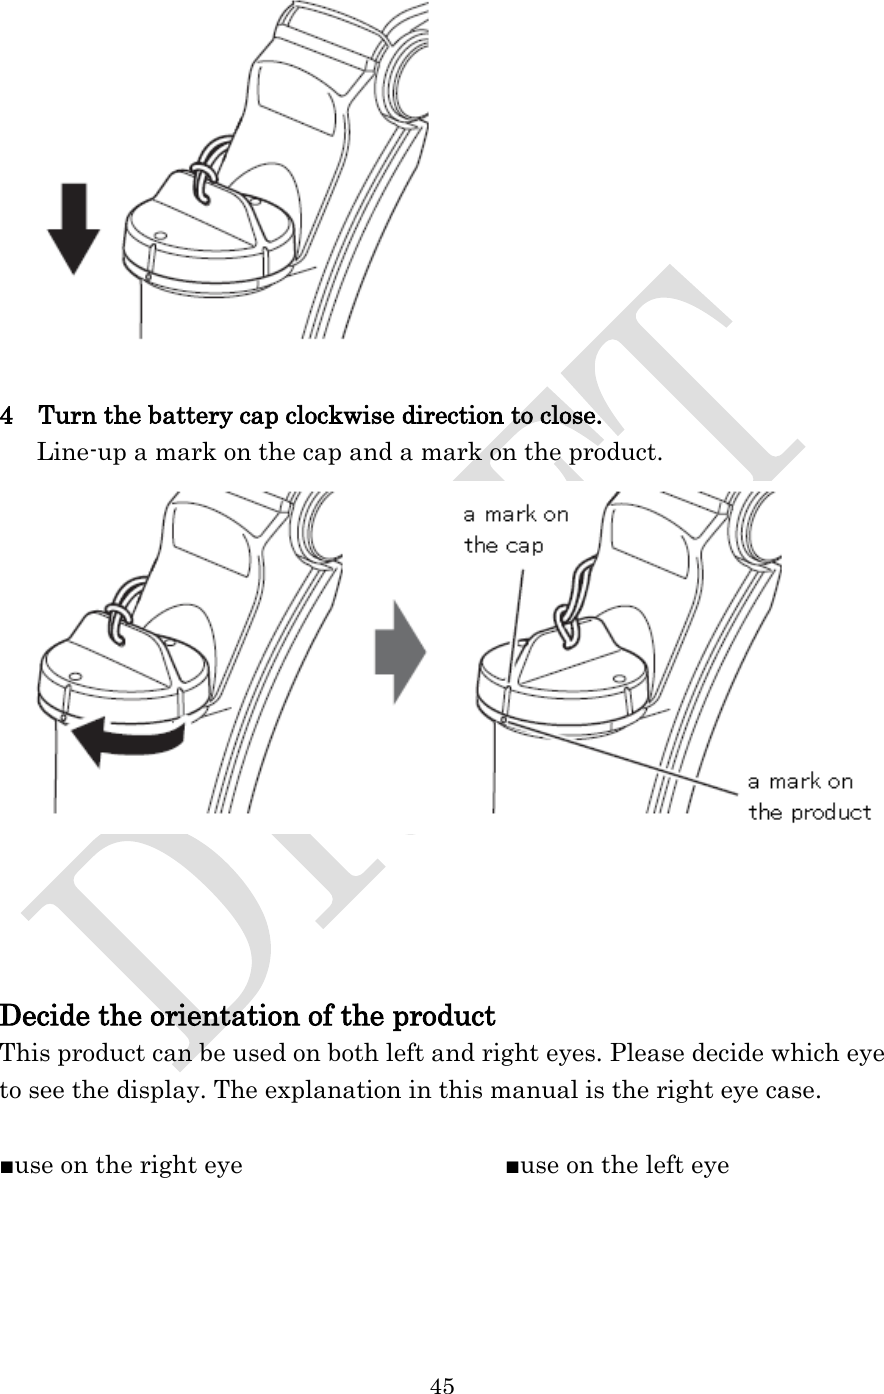  45    4    Turn the battery cap clockwise direction to close.    Line-up a mark on the cap and a mark on the product.      Decide the orientation of the product This product can be used on both left and right eyes. Please decide which eye to see the display. The explanation in this manual is the right eye case.  ■use on the right eye                                          ■use on the left eye 